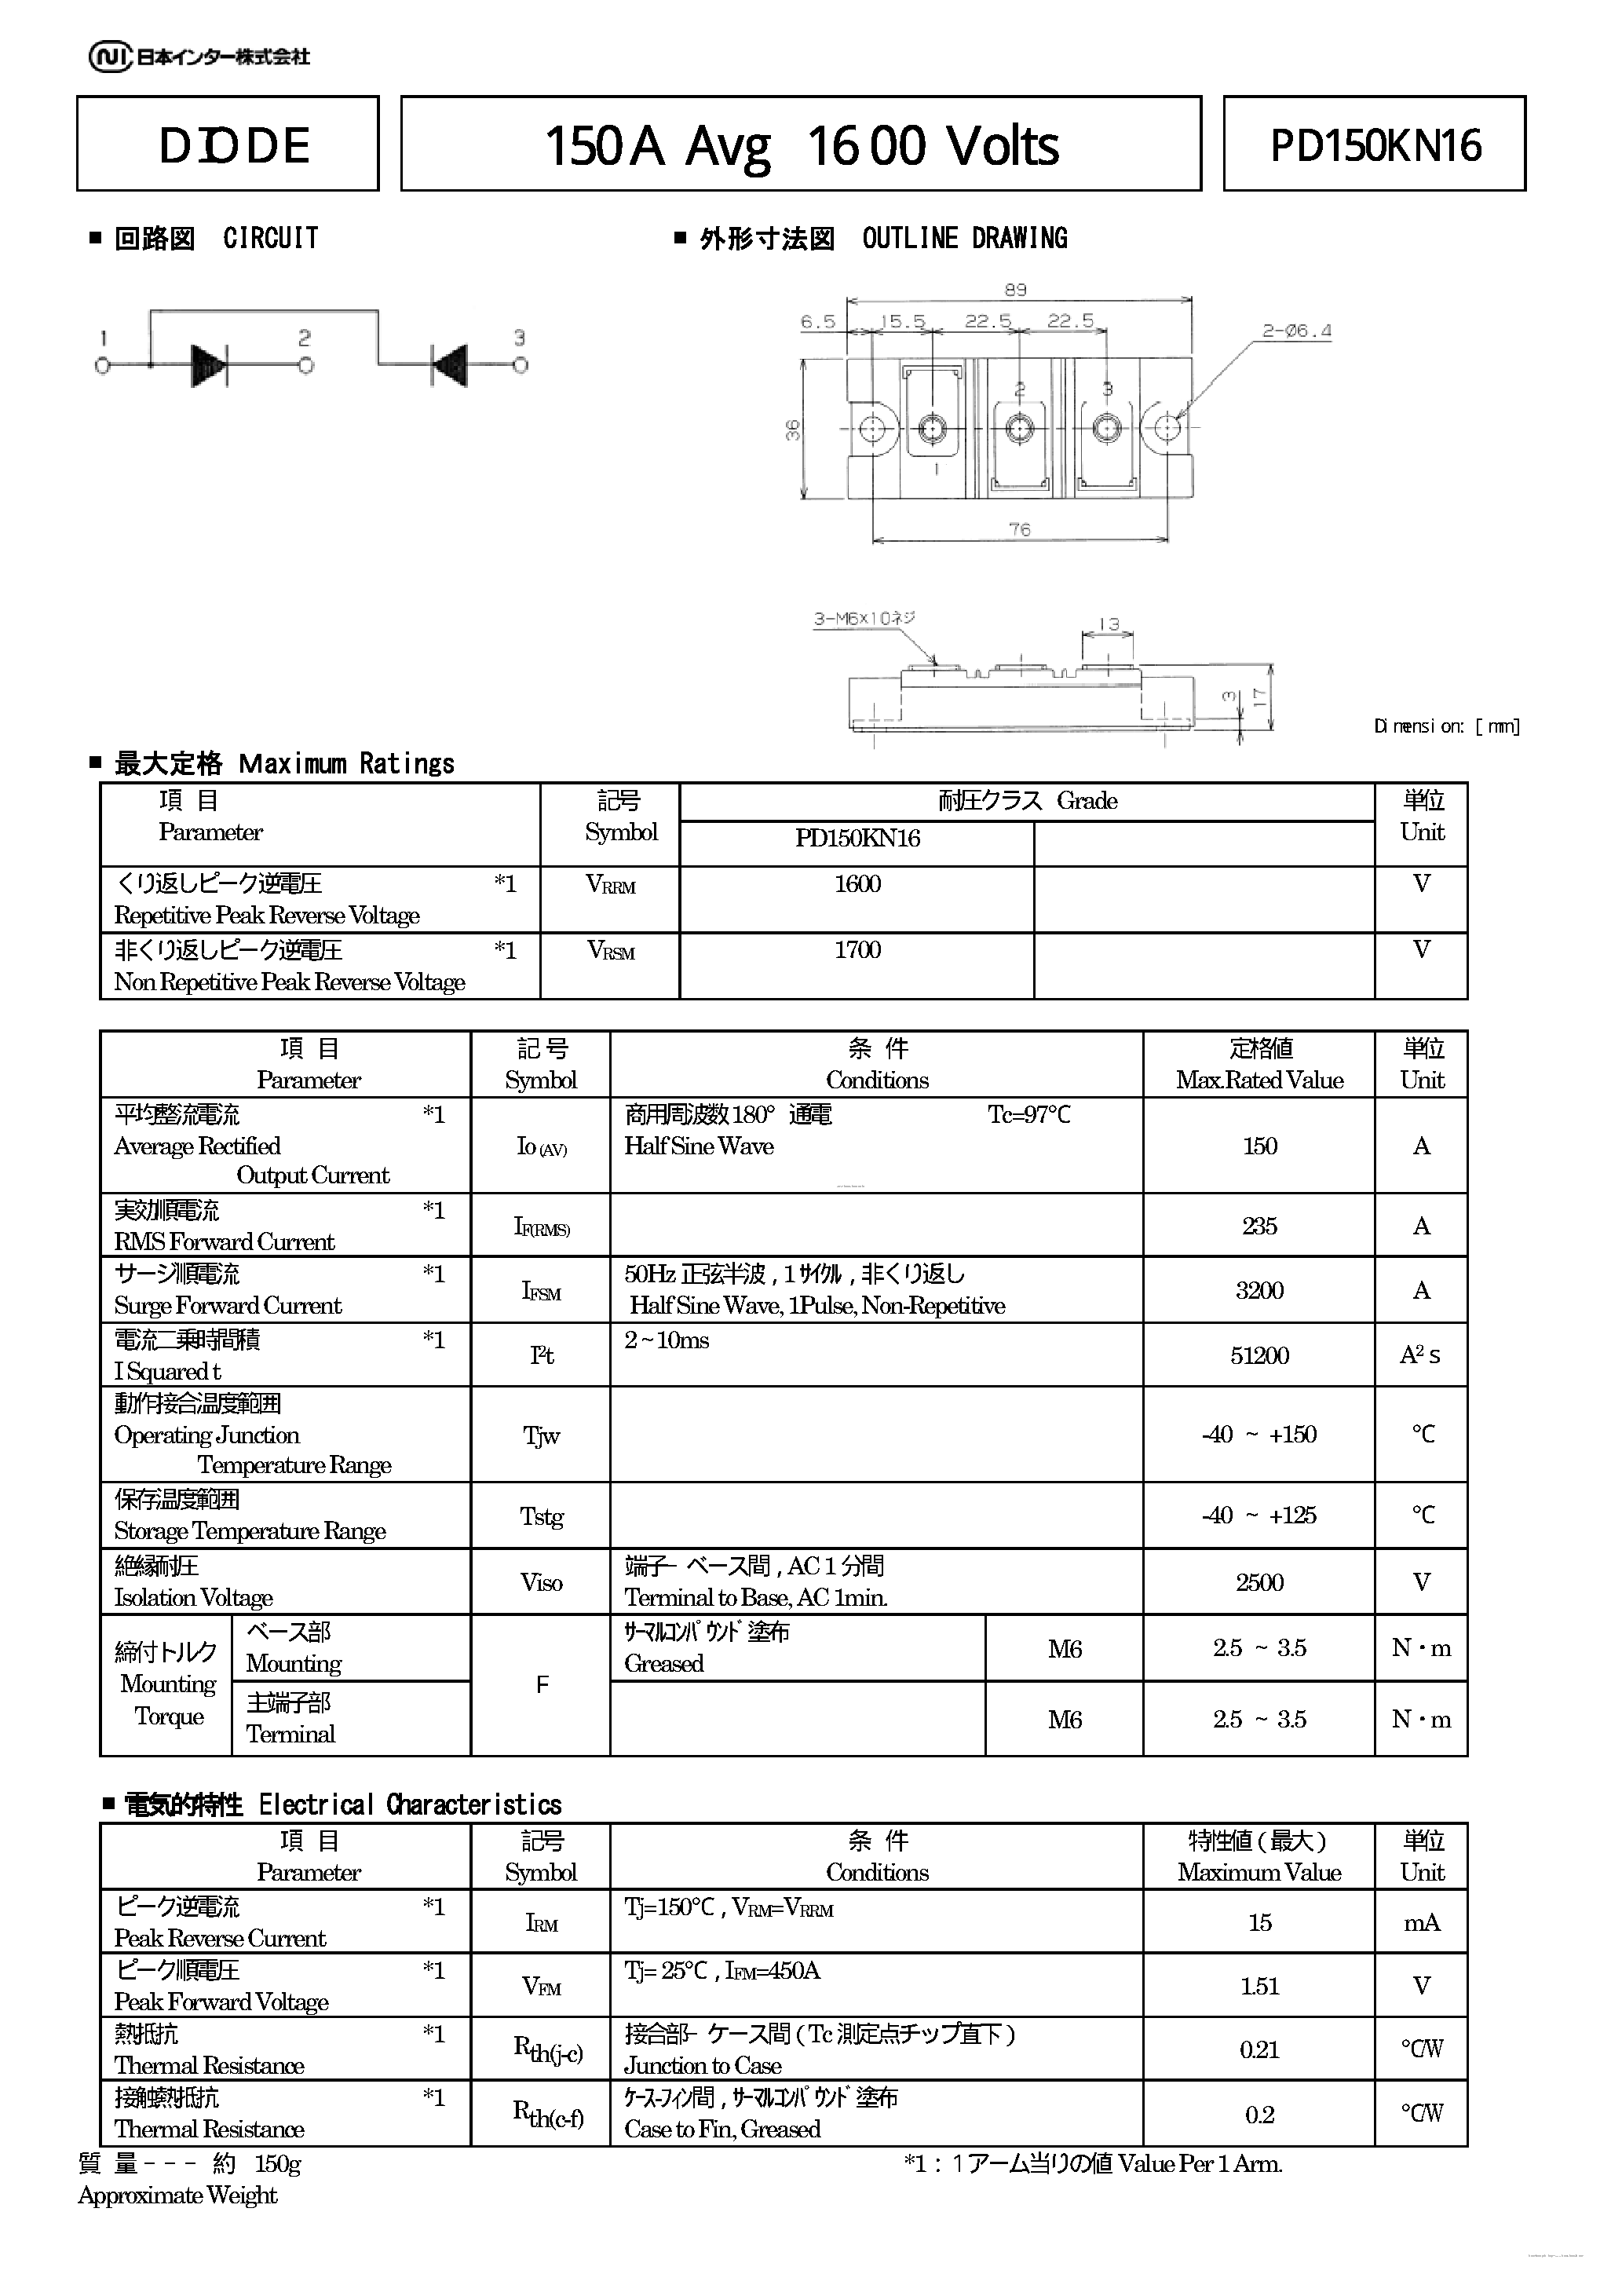 Datasheet PD150KN16 - DIODE page 1